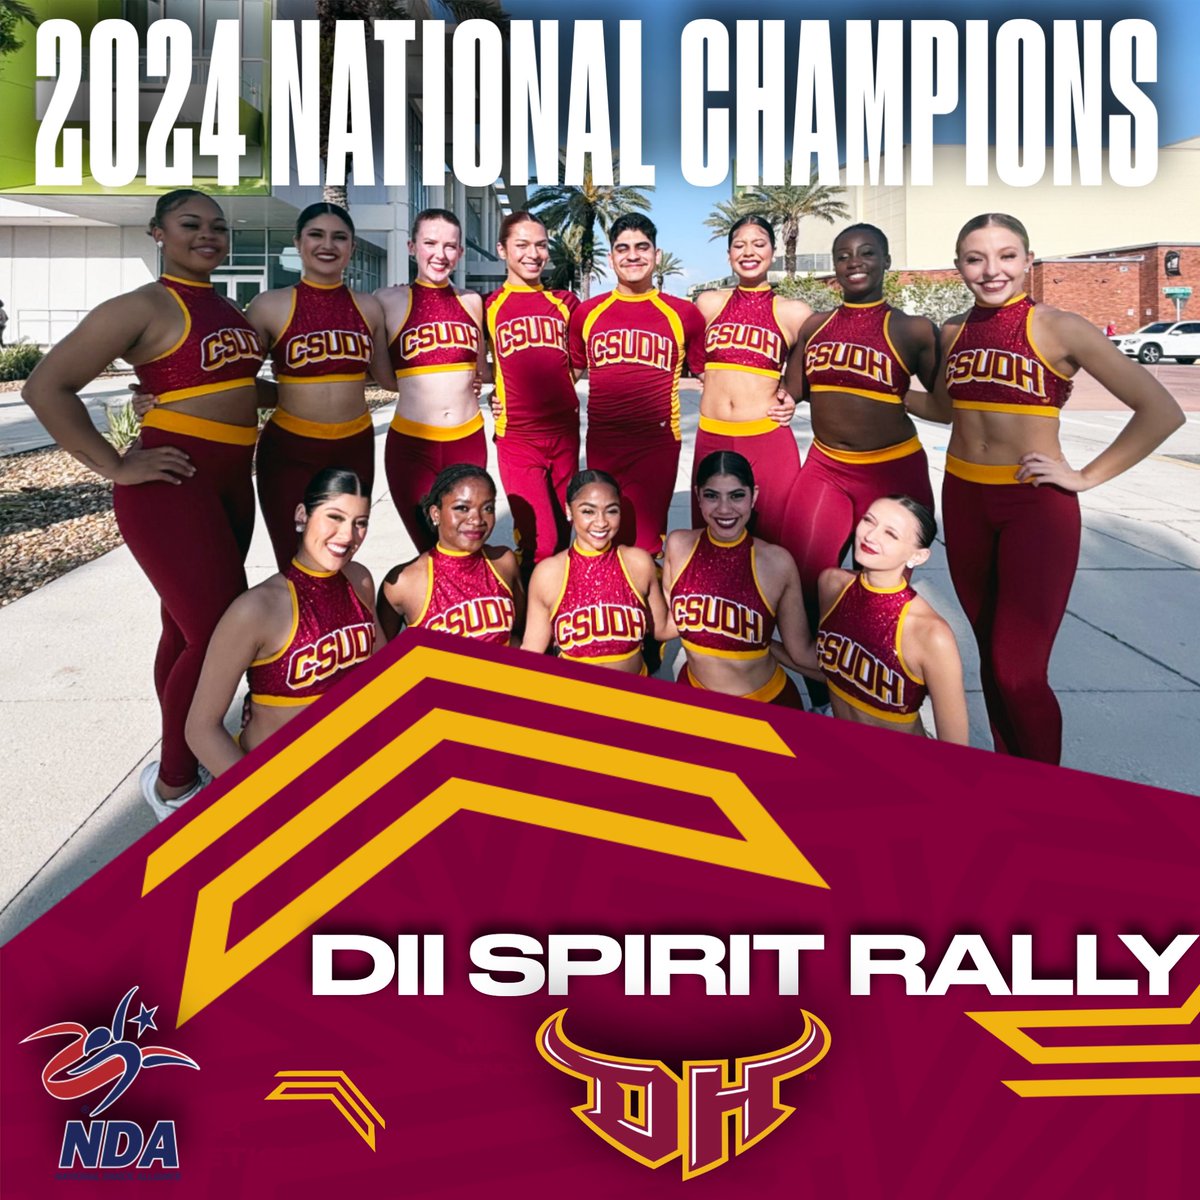 For the second consecutive year, @CSUDHDanceTeam has been crowned the 2024 National Champions in DII Spirit Rally!! Congrats Toros! Way to represent the Toro Nation on the big stage!! #TorosPride #ToroSpirit